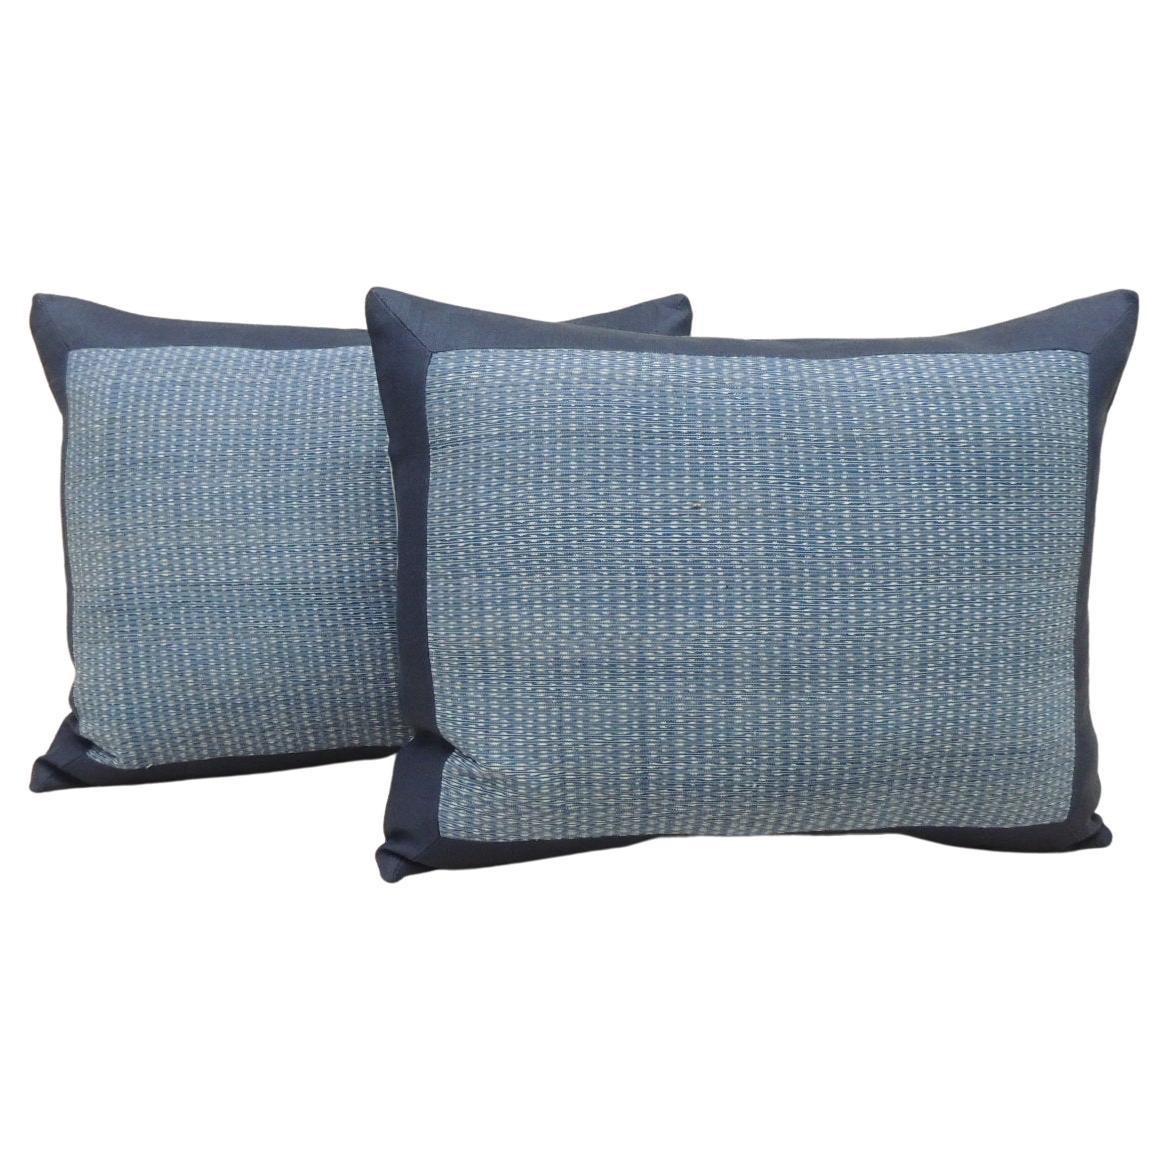 Woven Blue and White Ikat Bolster Decorative Pillows